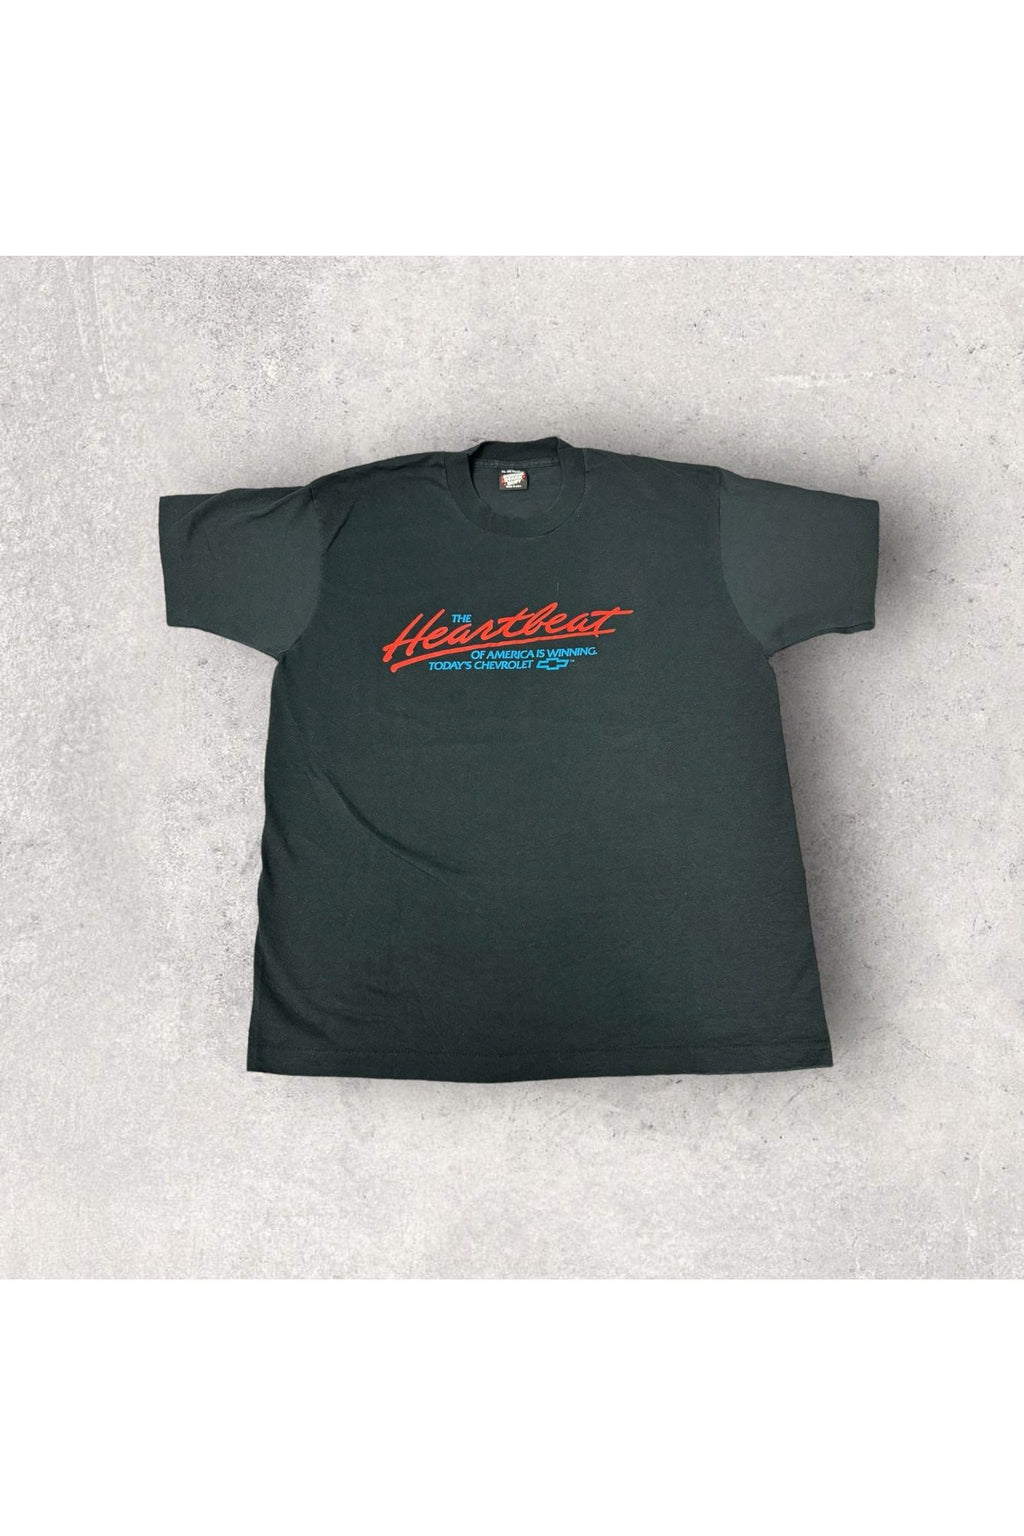 Vintage Single Stitch Best Screen Stars The Heartbeat of America Is Winning Chevy Tee- XL